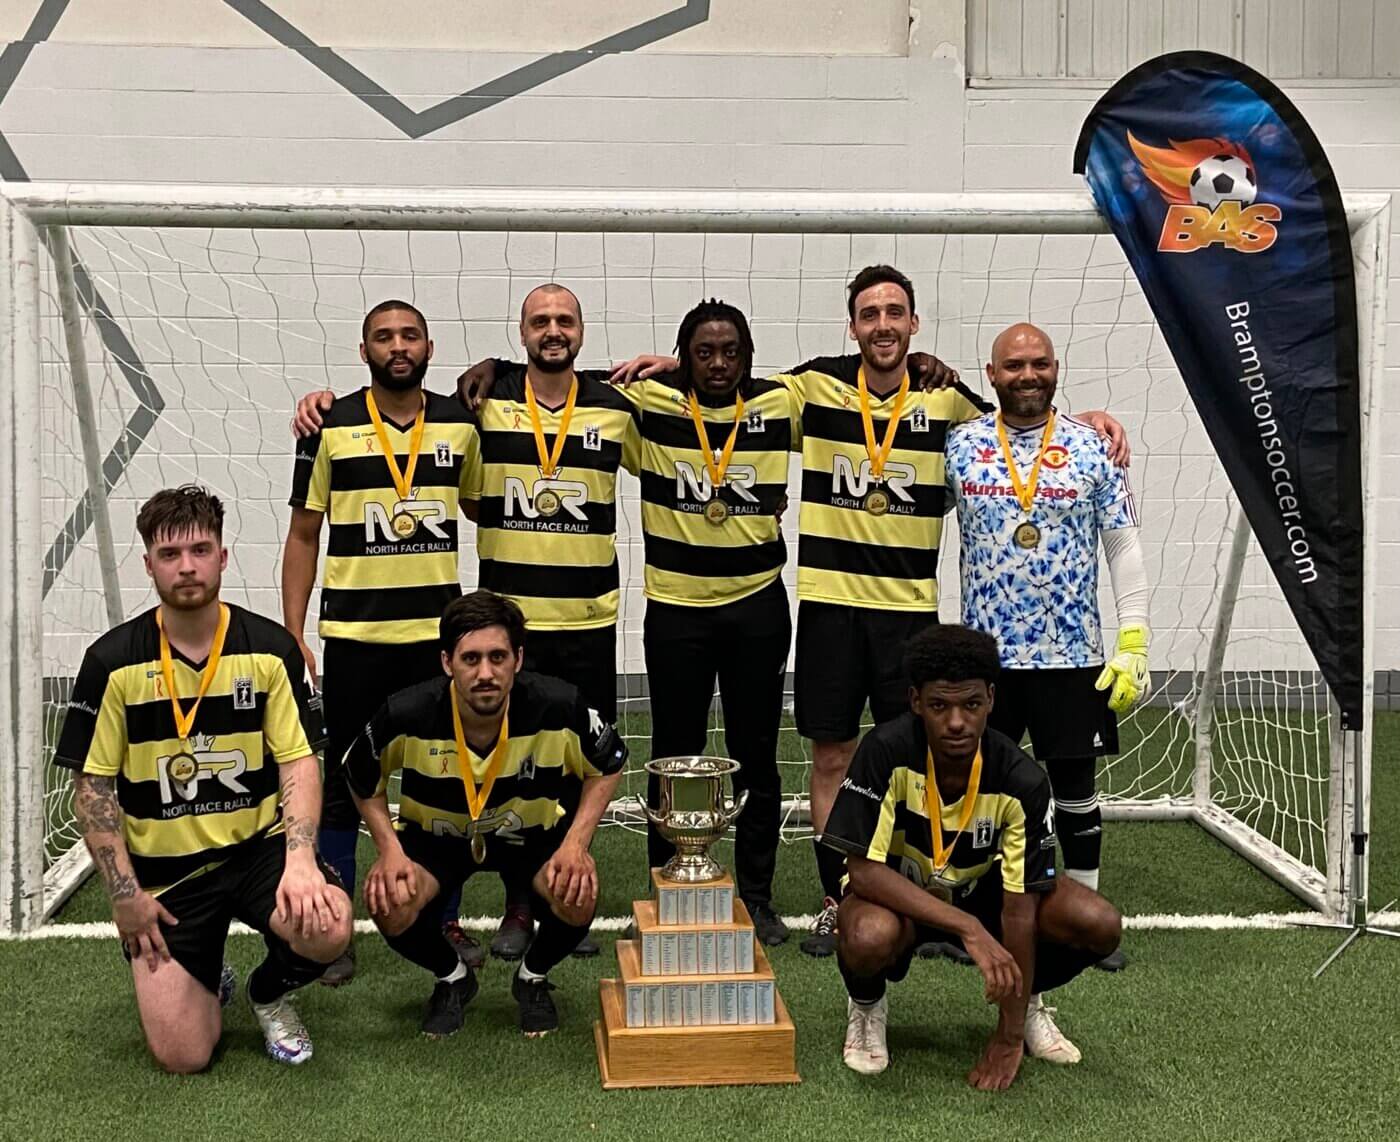 Playoff Soccer Returns to the Brampton Soccer Centre. C4N! Winter Division A Champions.